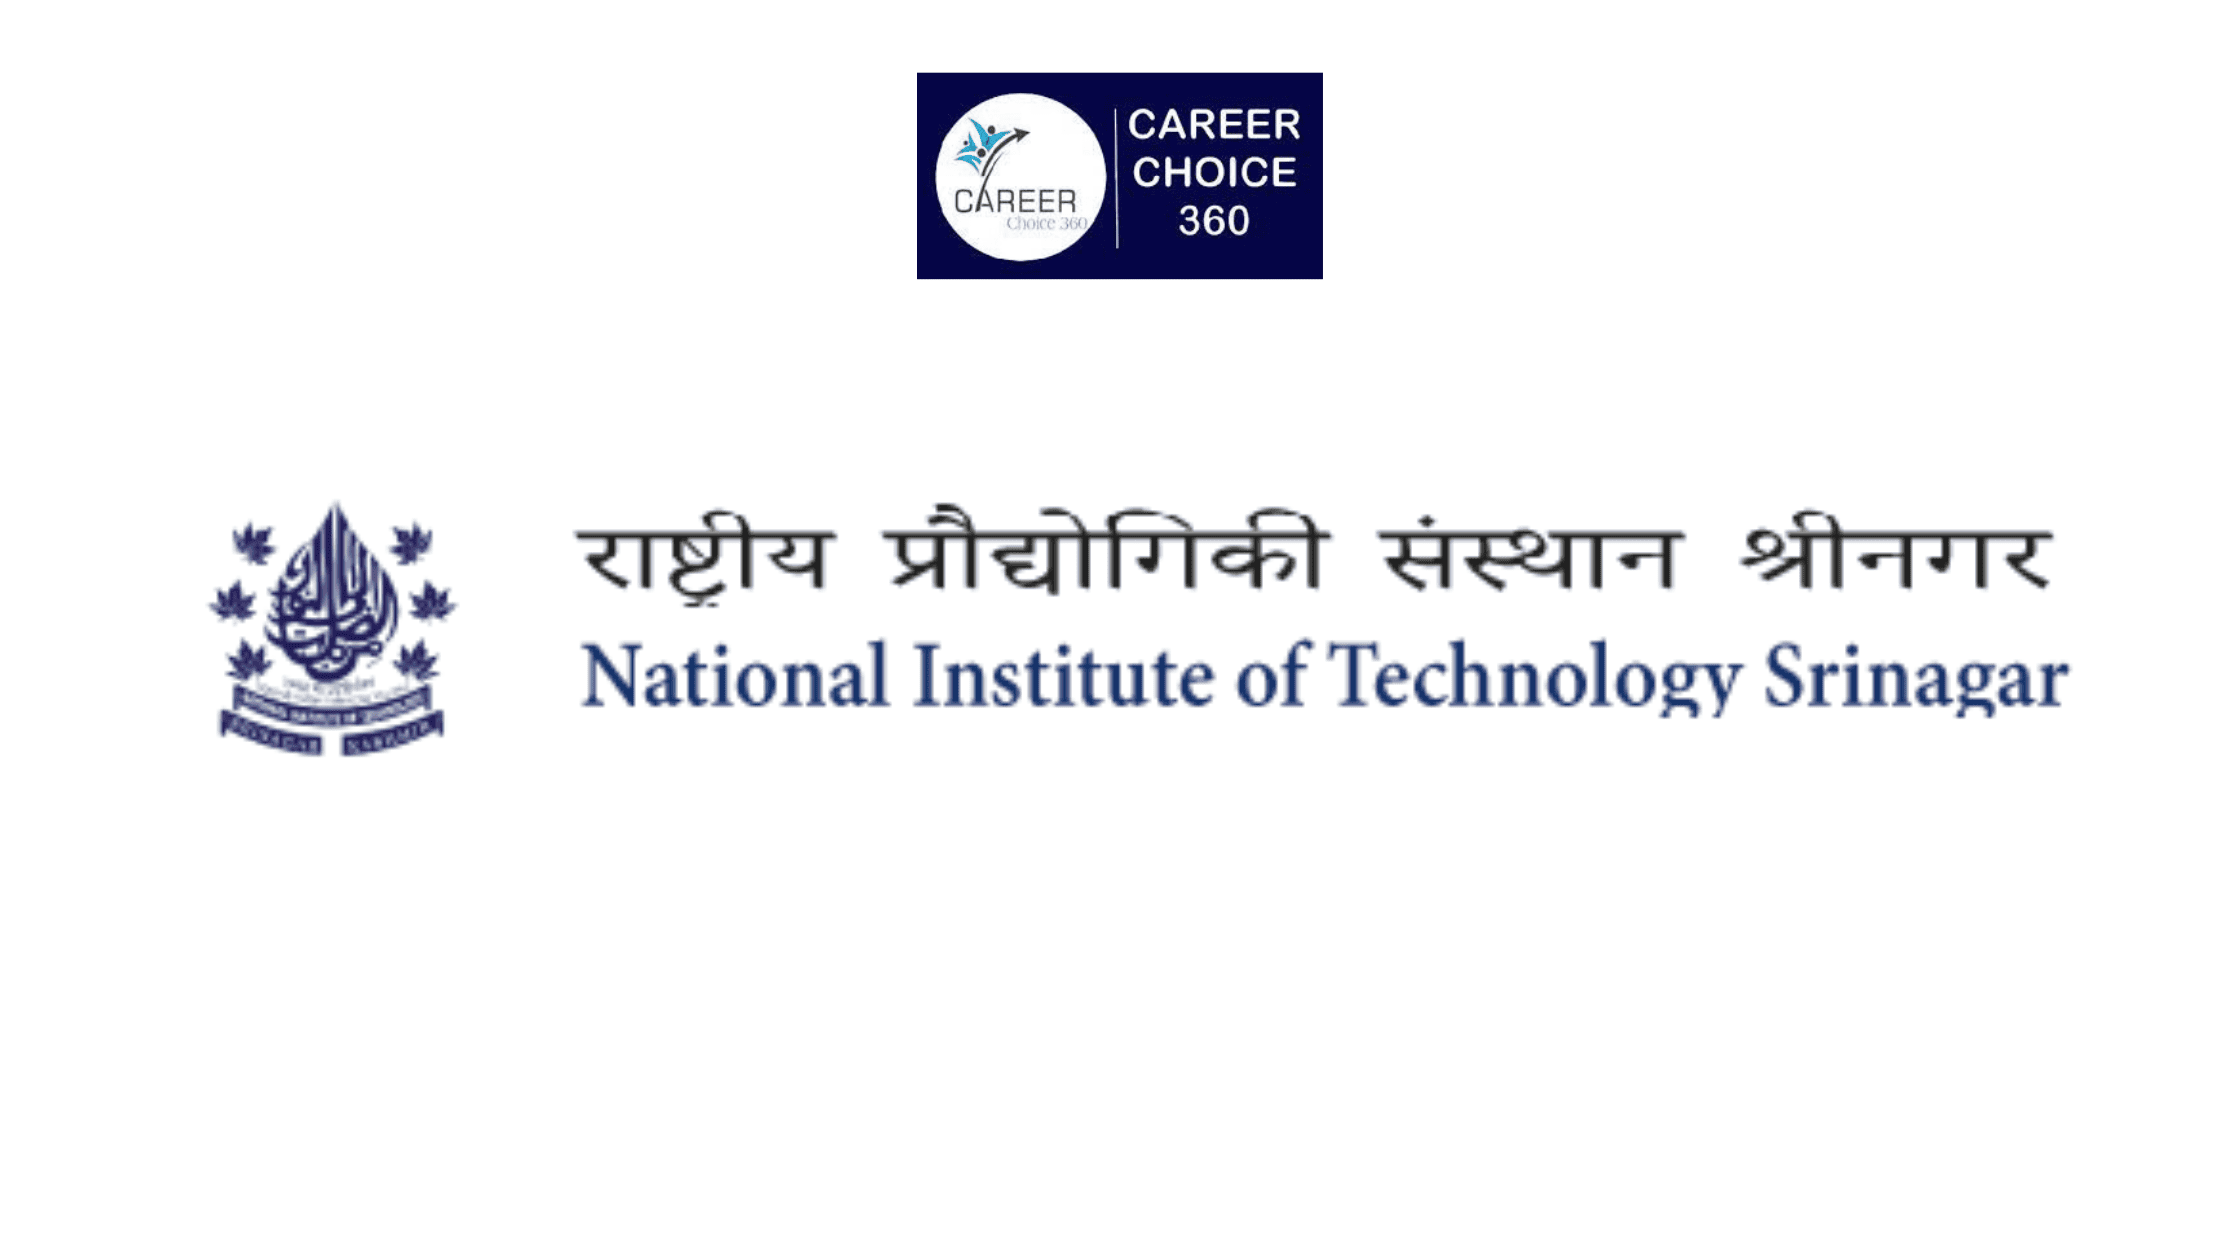 You are currently viewing National Institute of Technology Srinagar (NIT Srinagar) : Course & Fees, Admission procedure, Rankings, and Placements